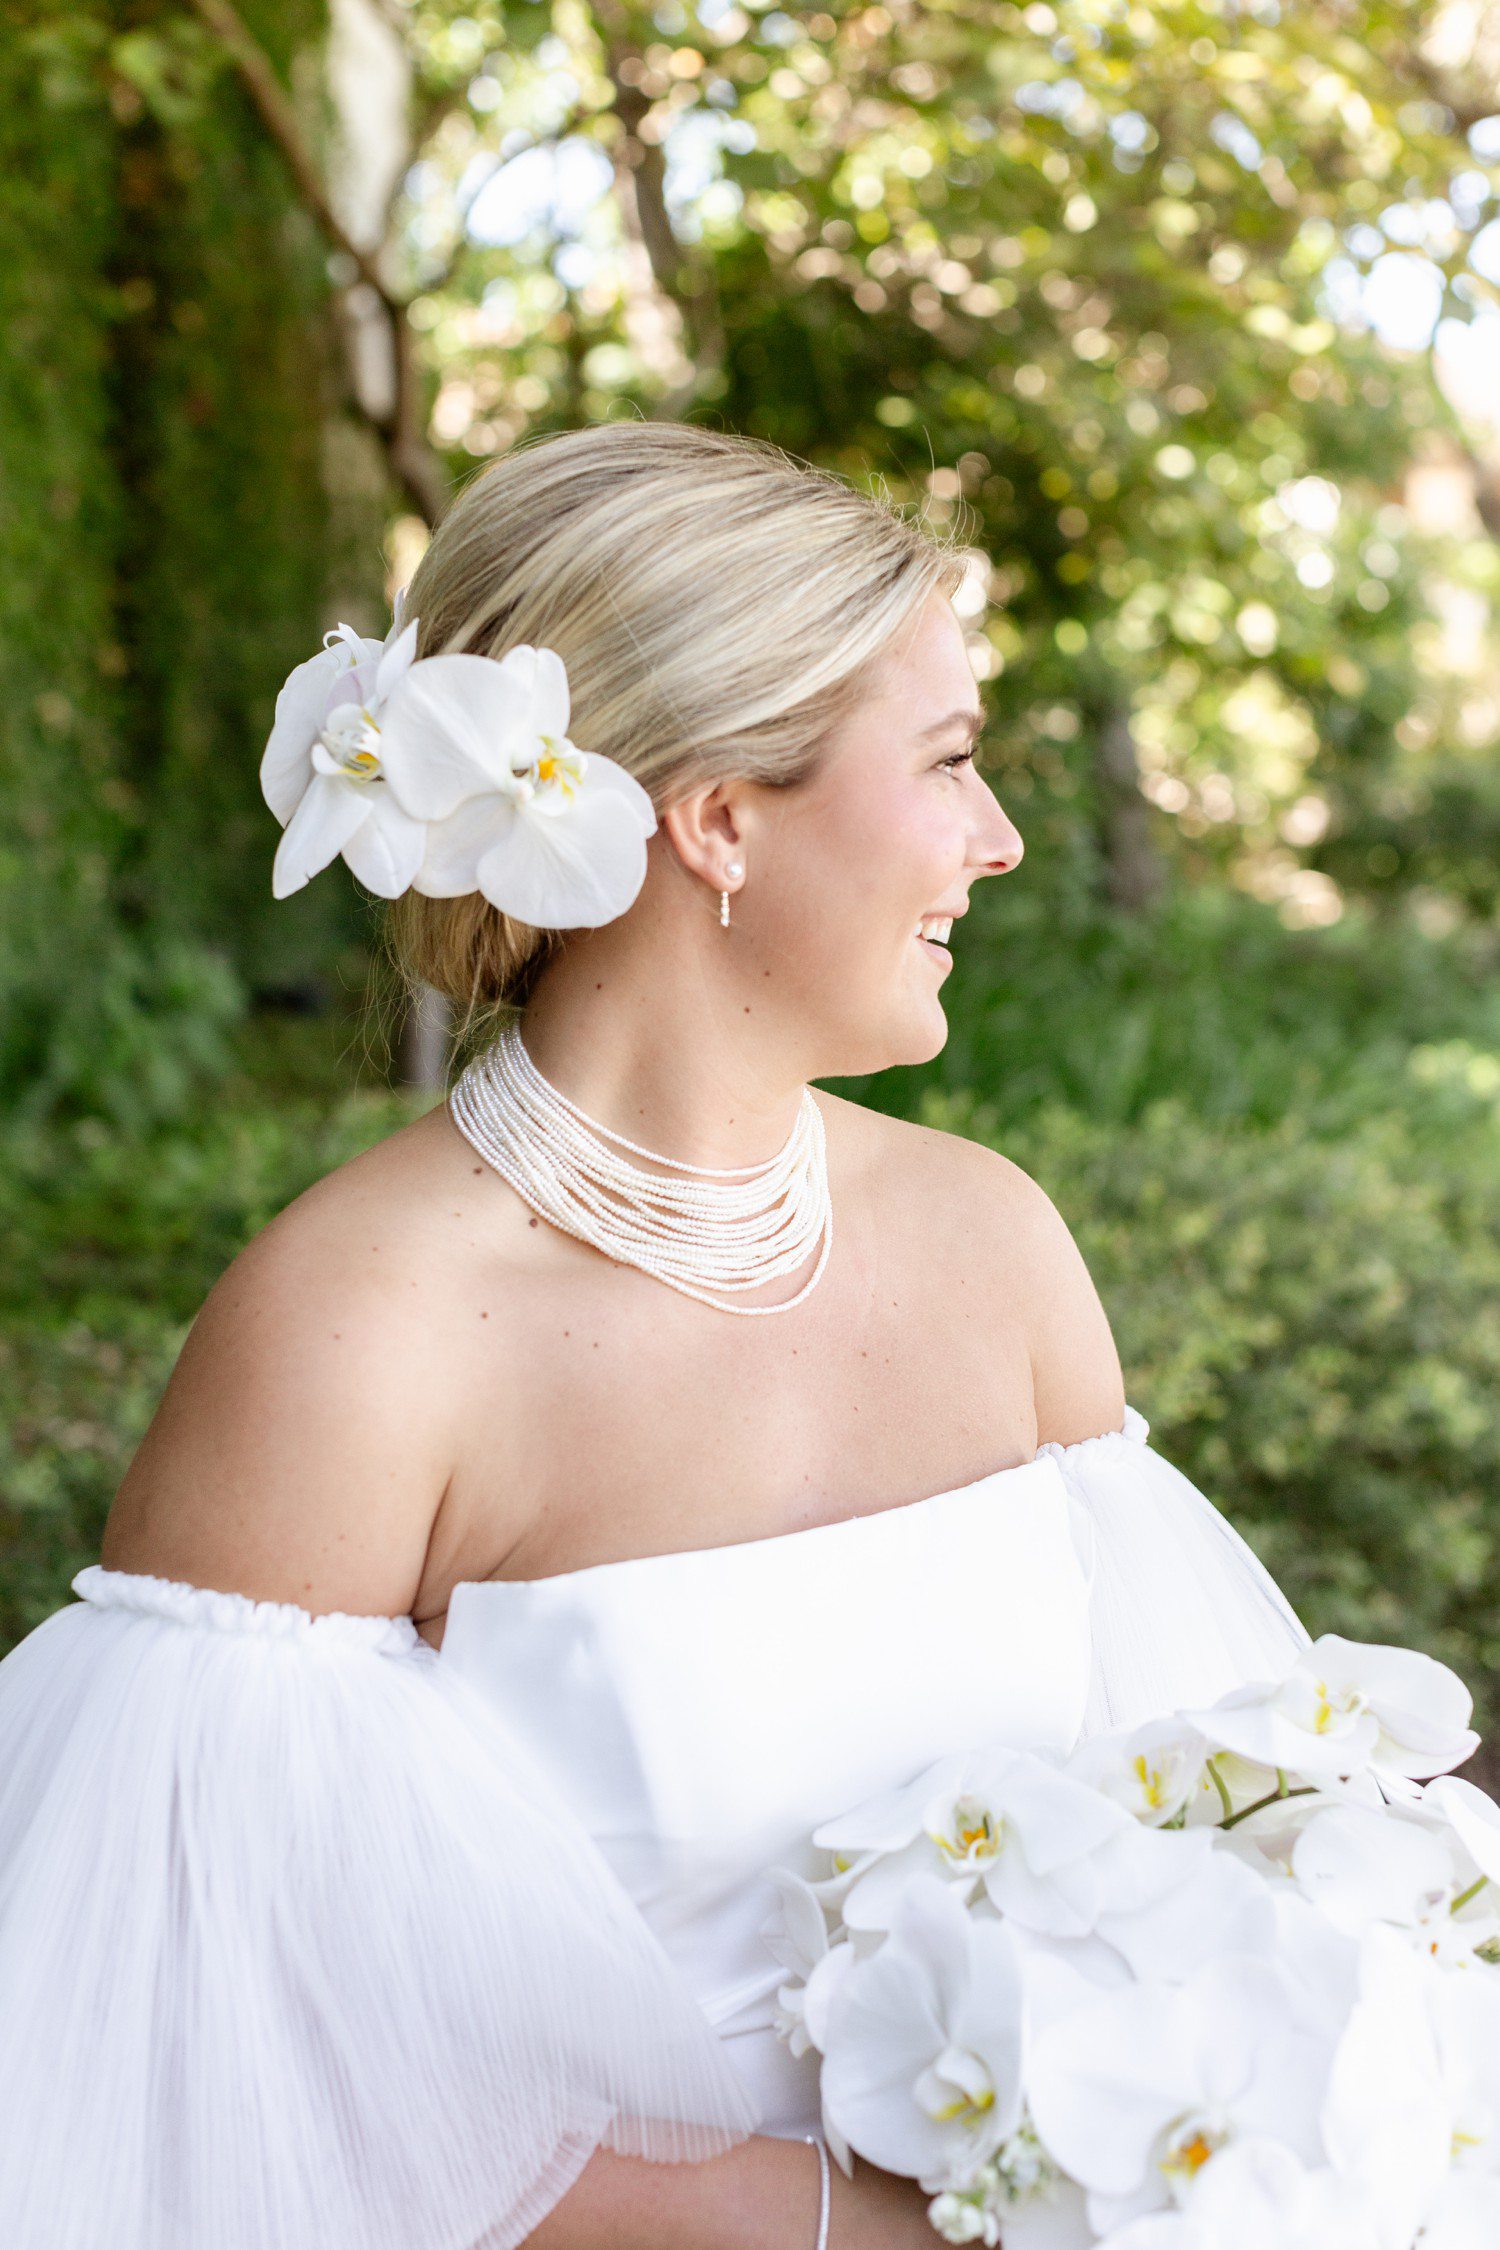 Bride with white orchids in hair and white orchid bouquet.